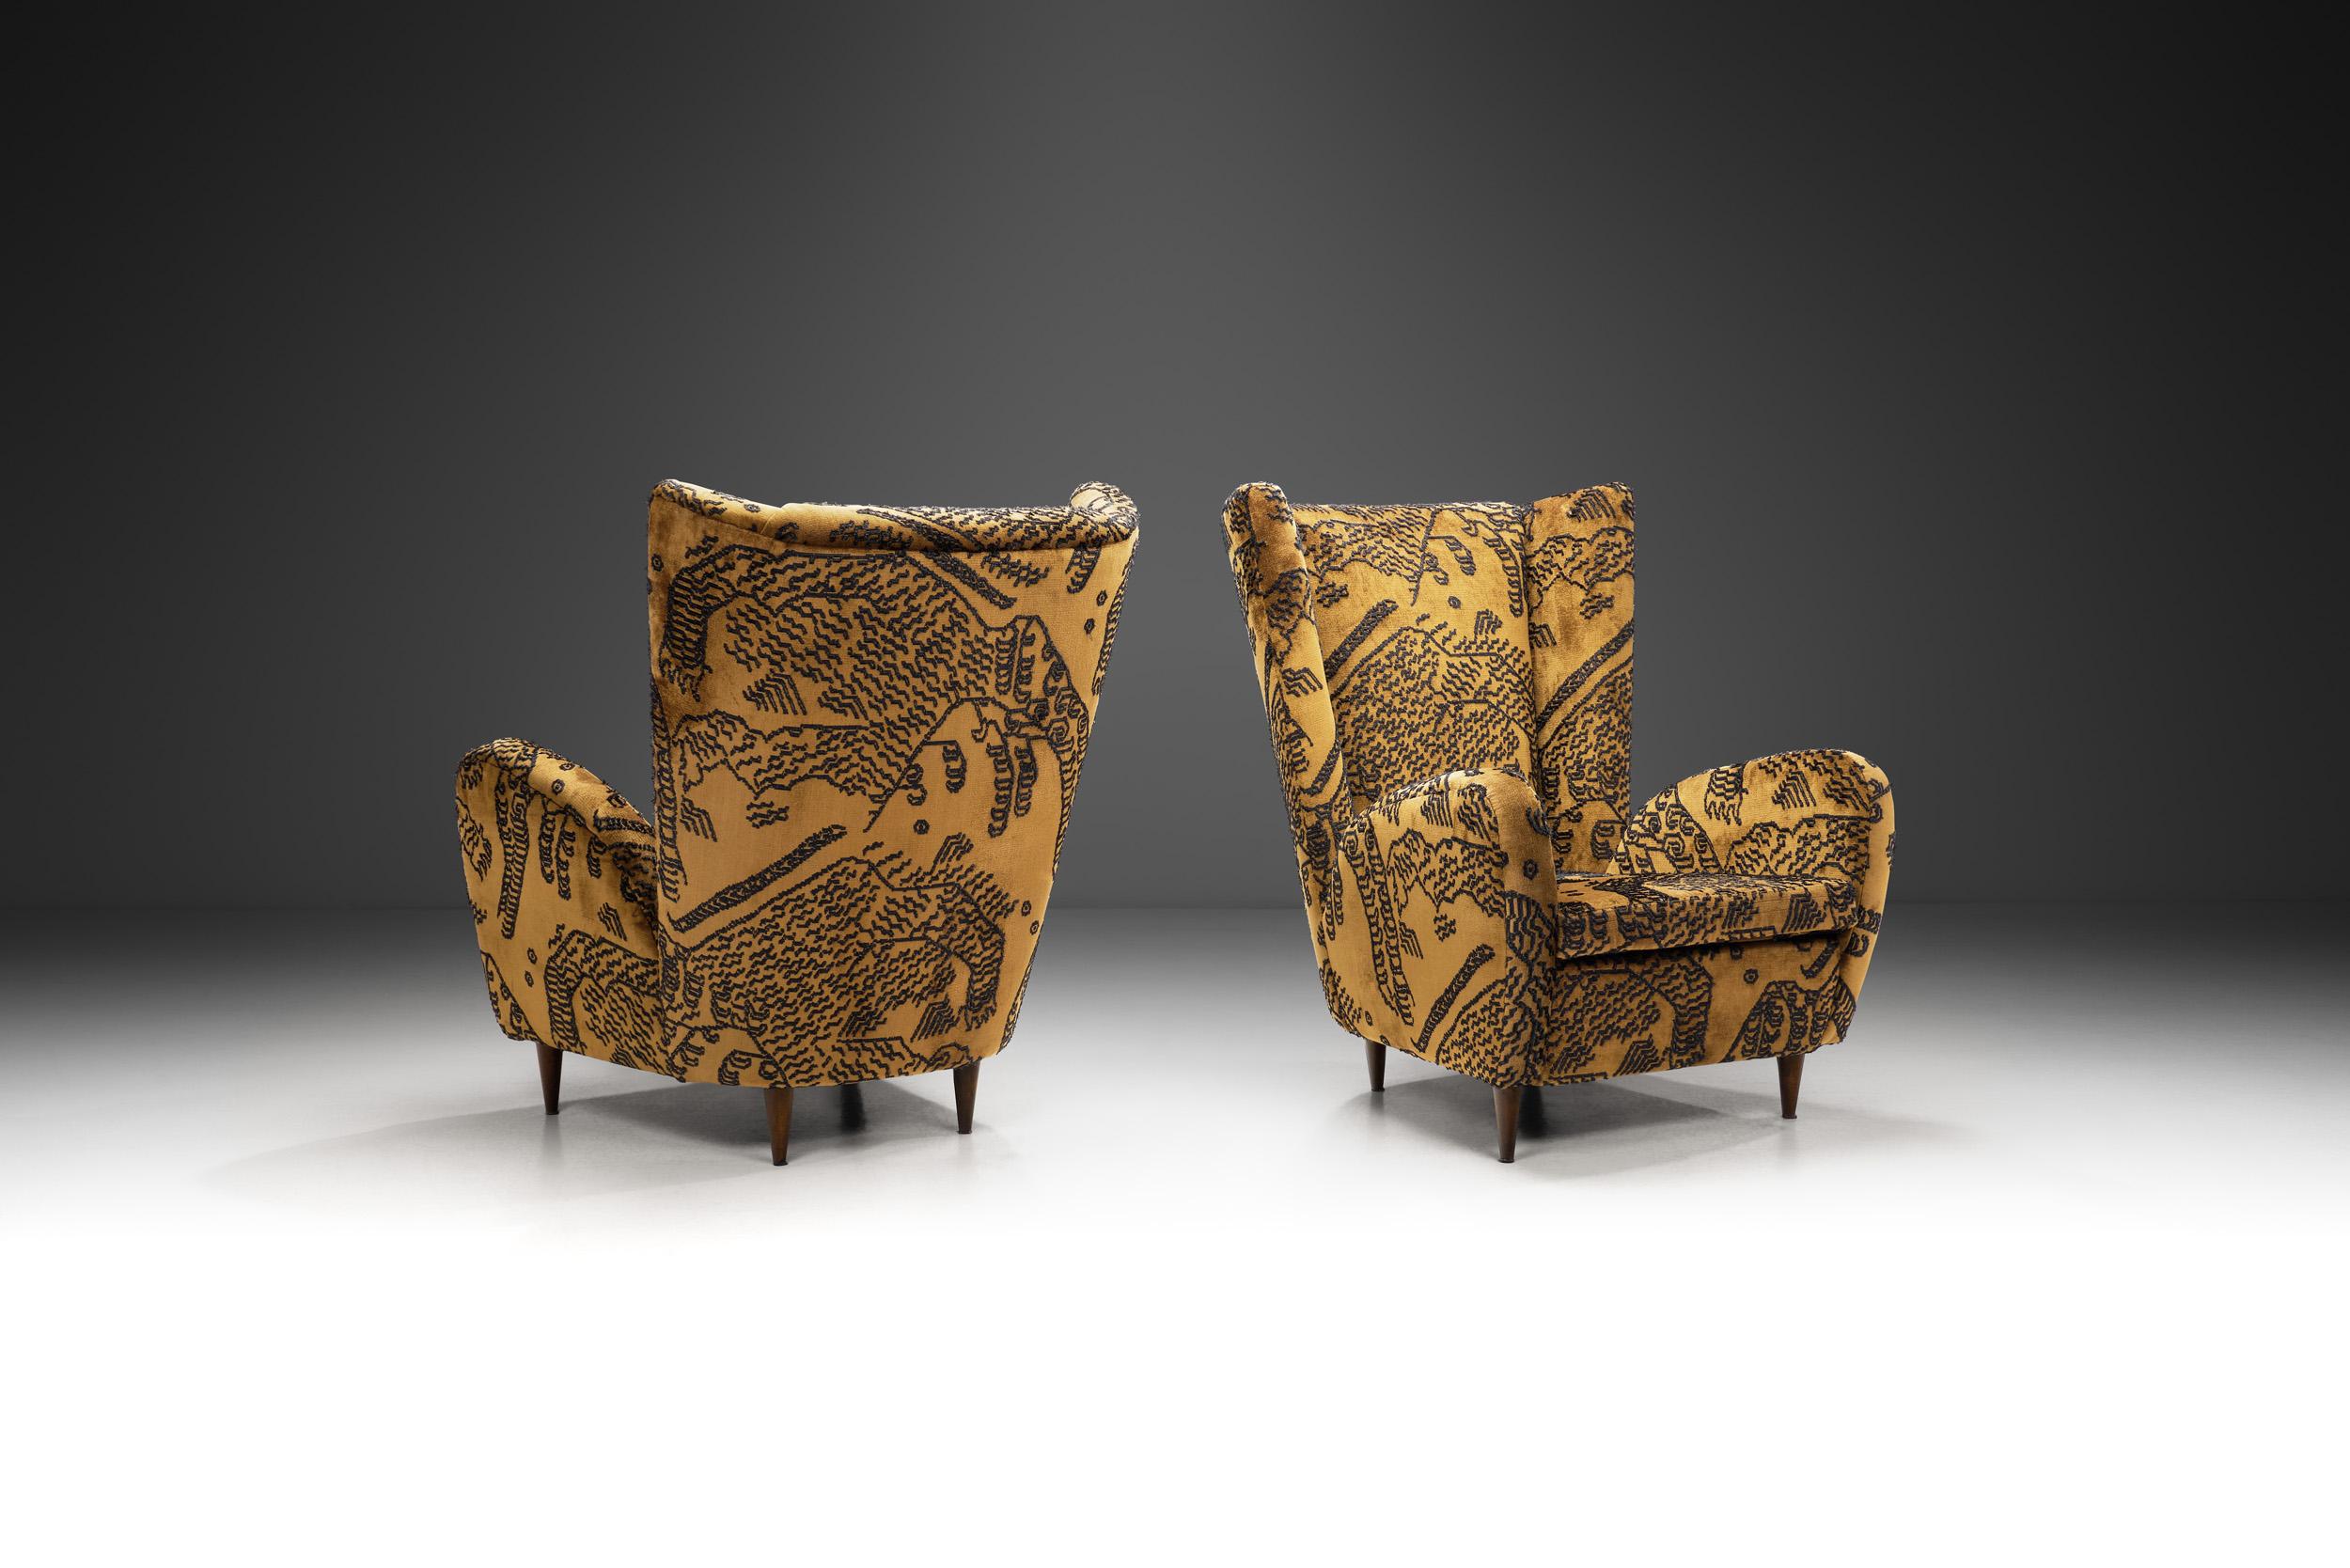 Italian Modern furniture is defined by unique design, perfect execution, and exclusivity. This pair of armchairs is attributed to Italian design icon, Paolo Buffa. Coinciding with contemporary debates about the role of design and its responsibility